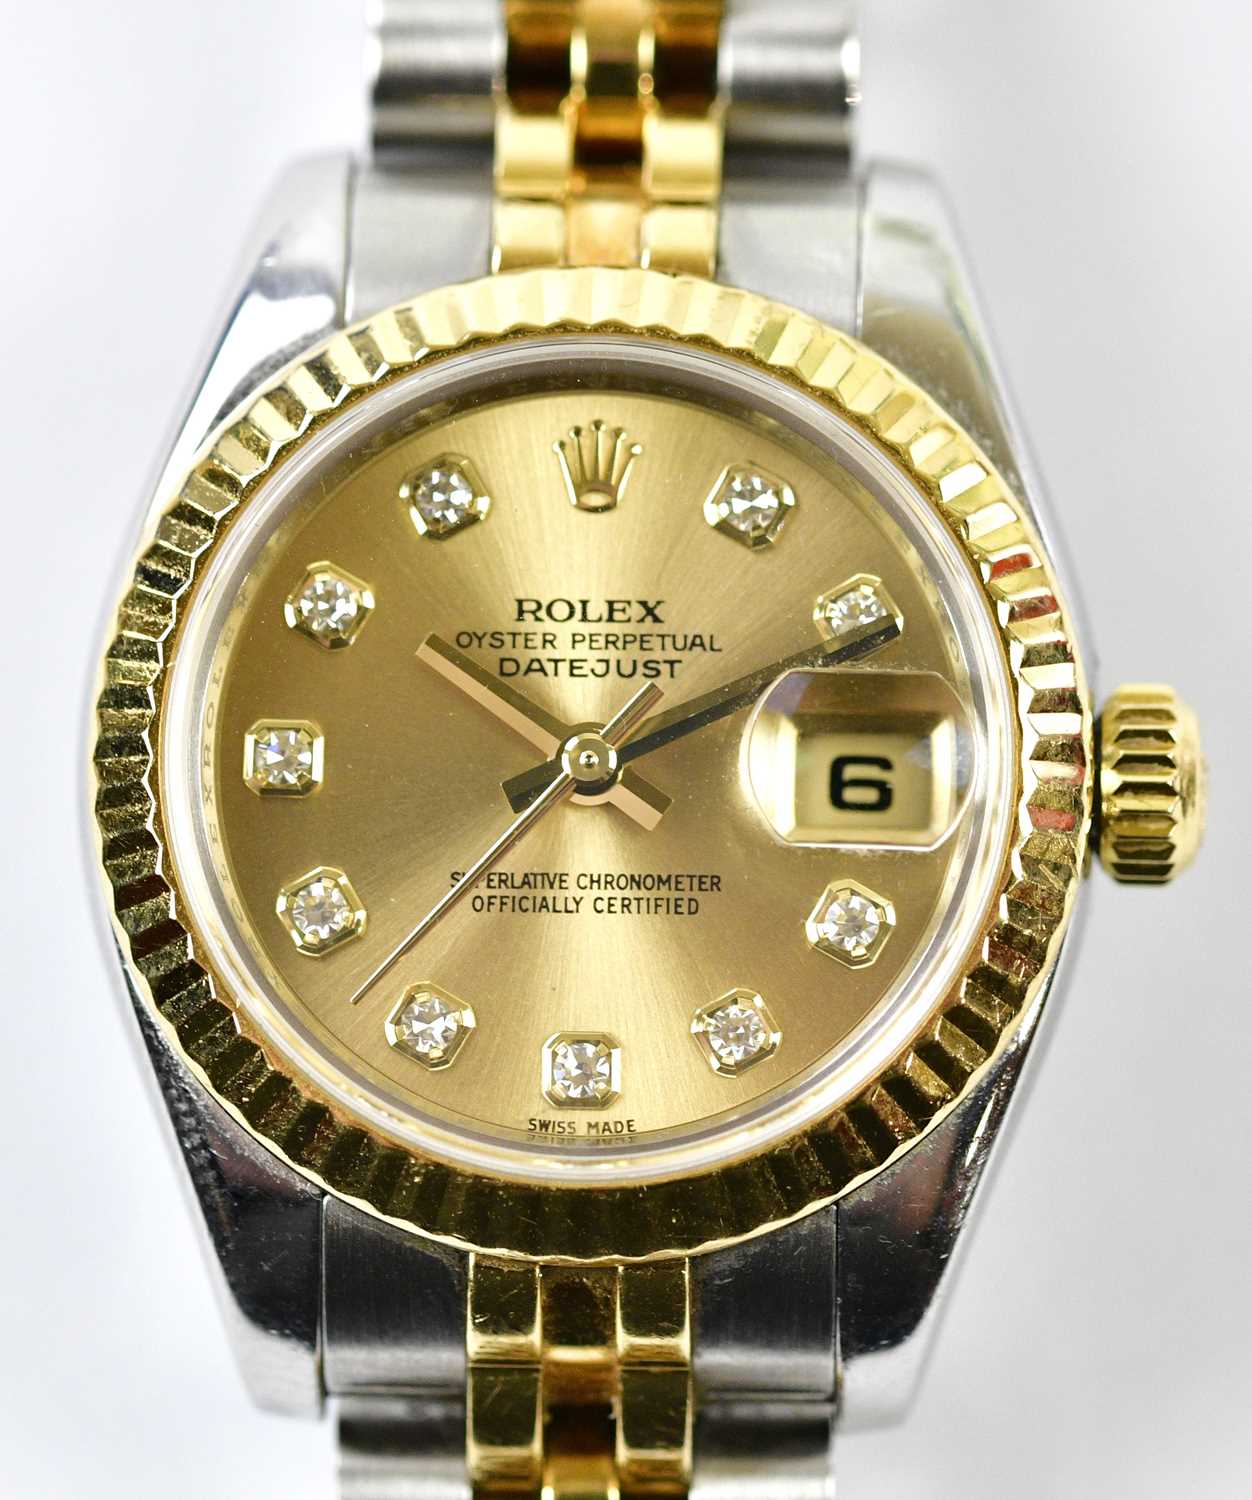 ROLEX; a lady's 18ct yellow gold stainless steel Oyster Perpetual Datejust wristwatch purchased